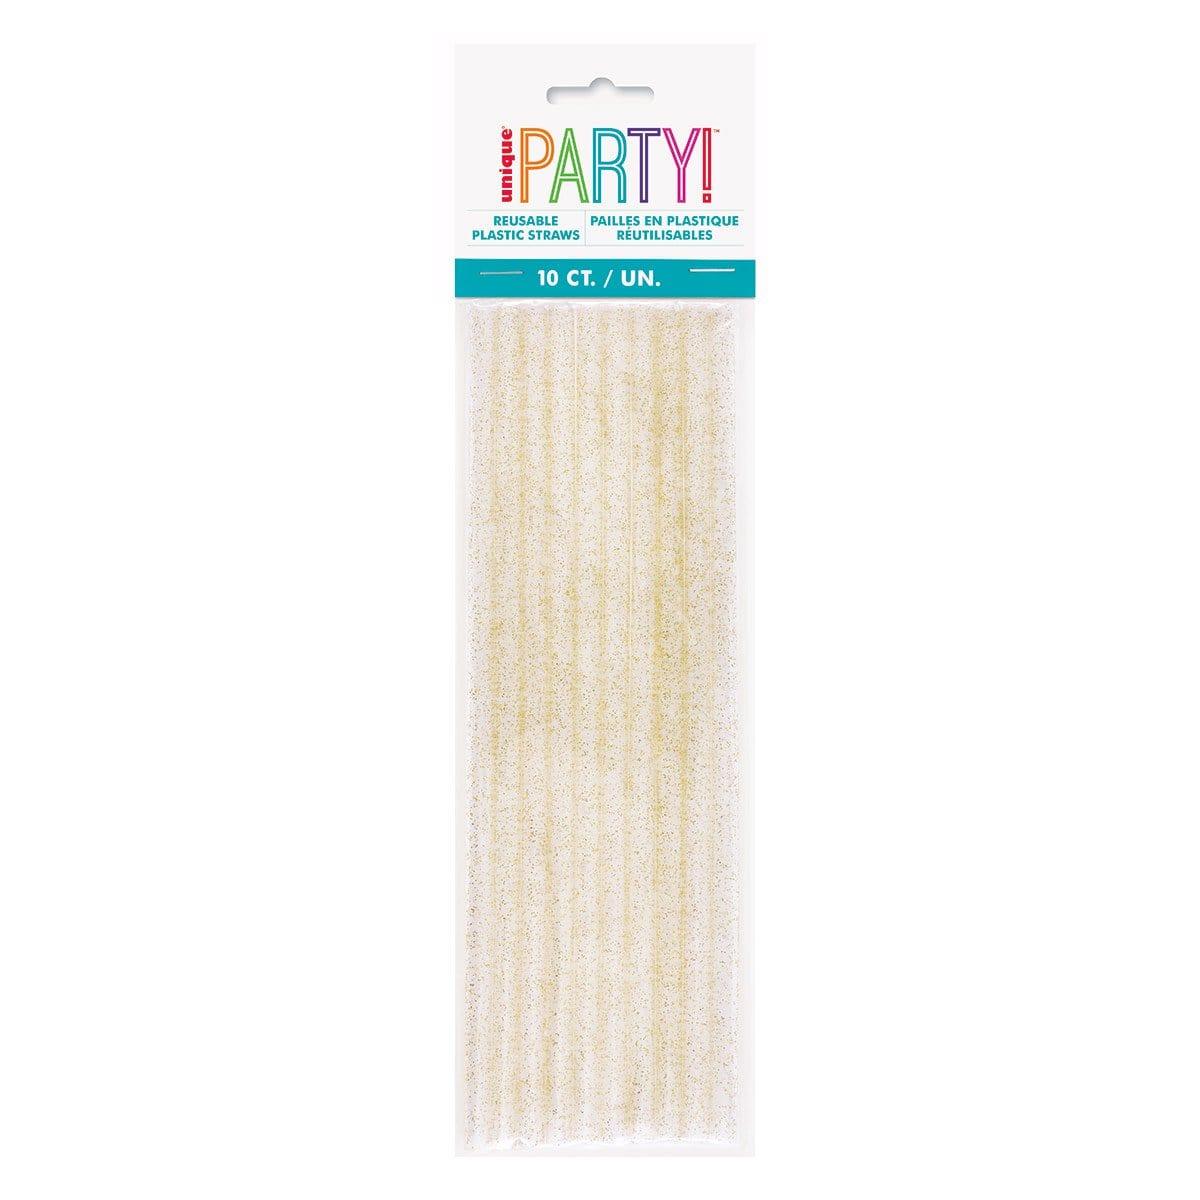 Buy General Birthday Gold Confetti Birthday Plastic Straws, 10 Count sold at Party Expert